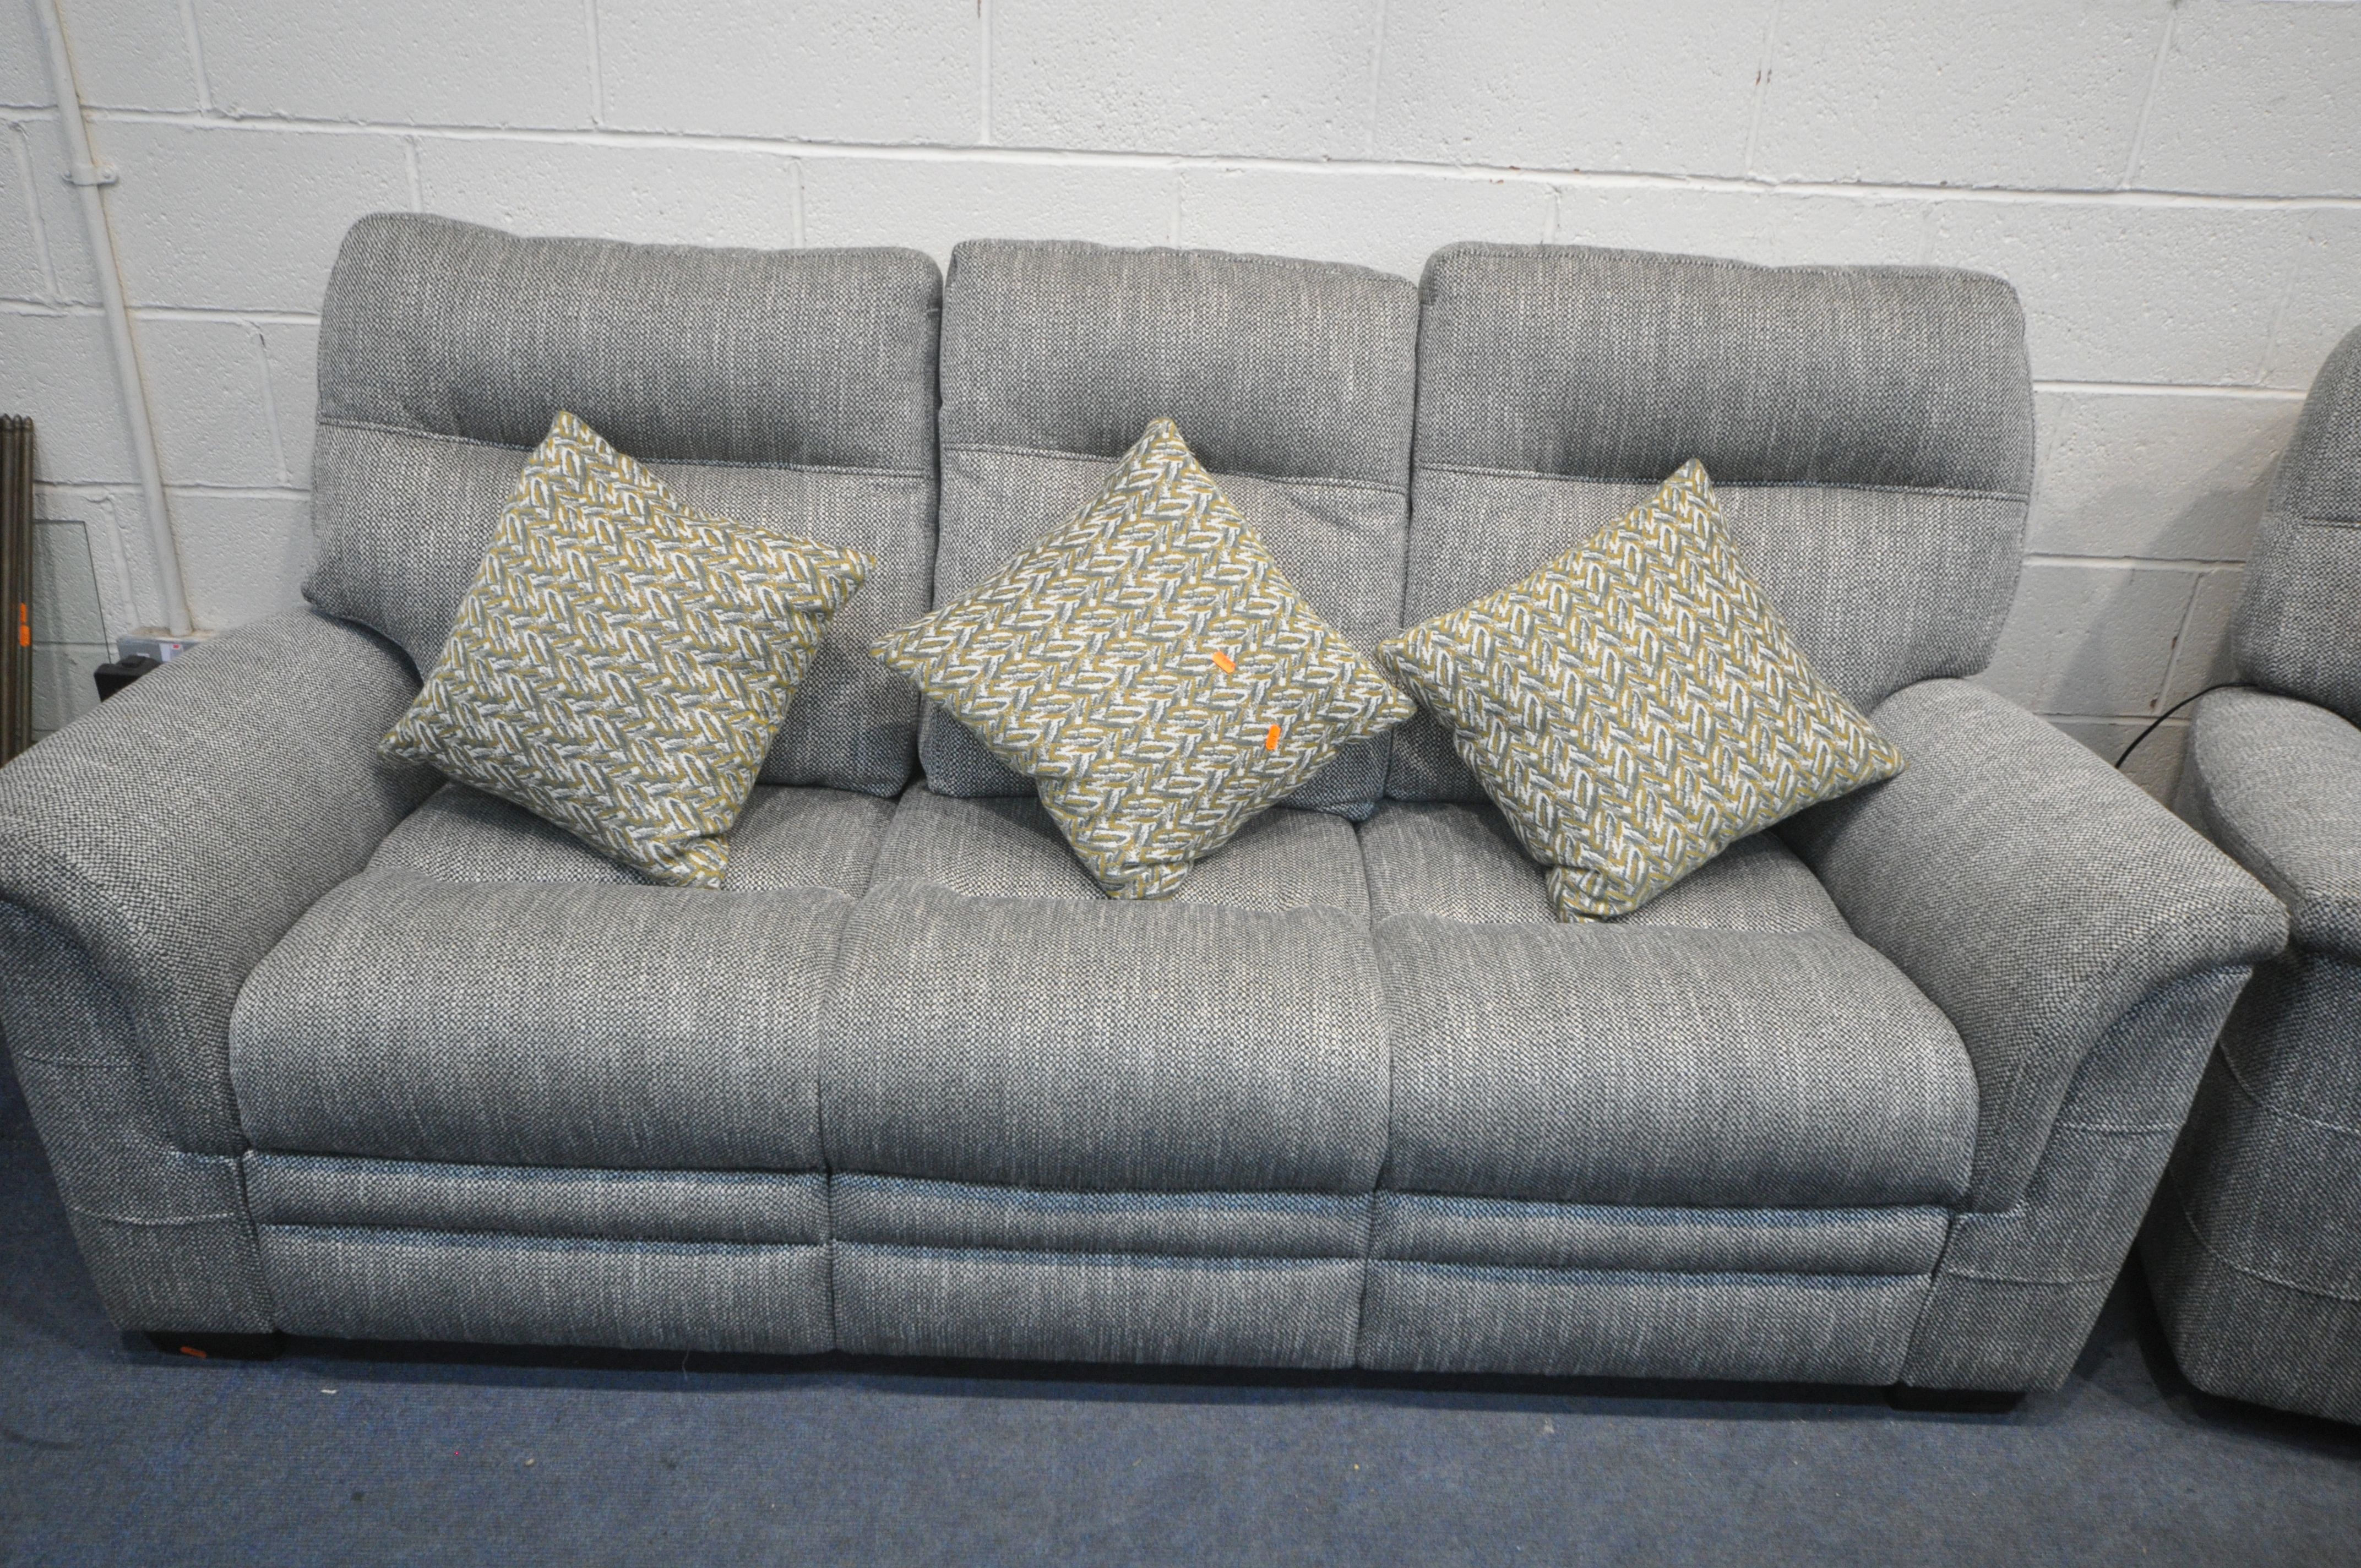 A PARKER KNOLL BLACK AND WHITE PATTERNED THREE PIECE LOUNGE SUITE, comprising a three seater settee, - Image 5 of 5